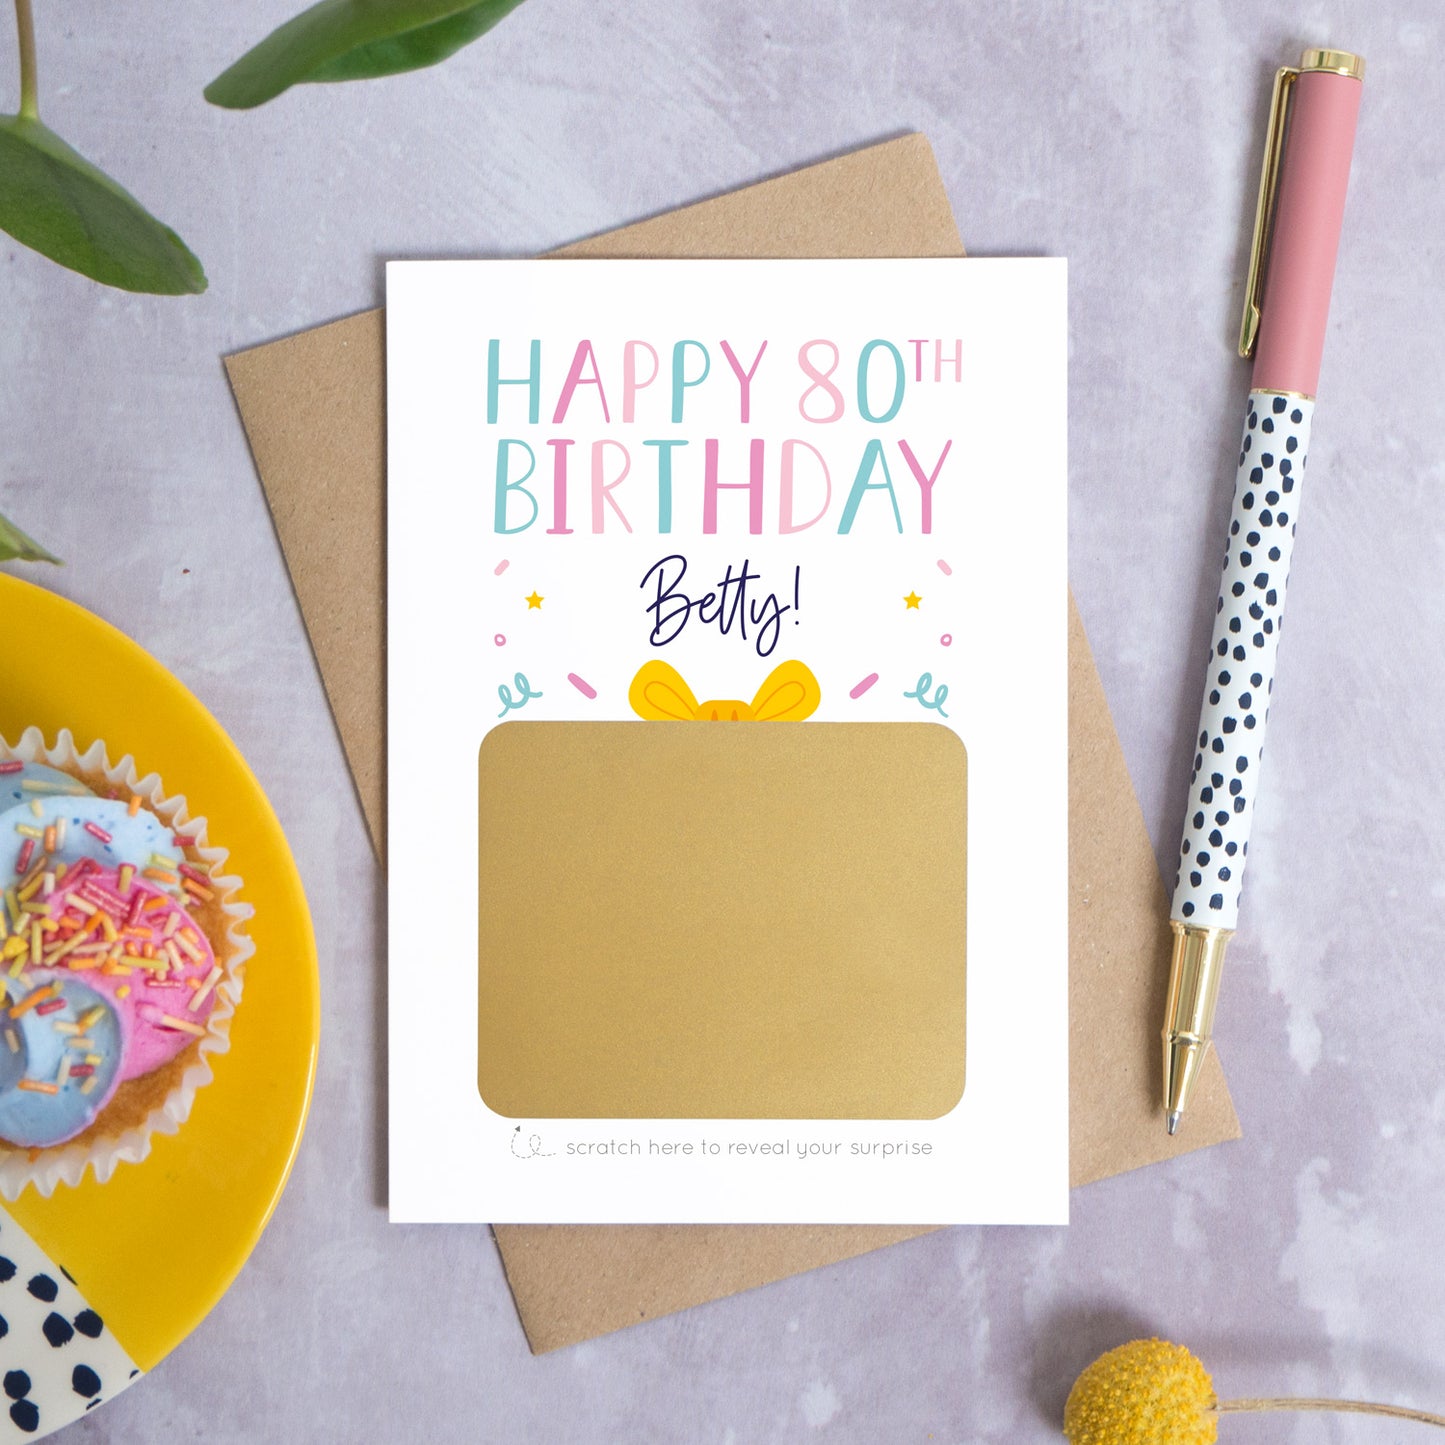 A personalised happy 80th birthday scratch card that has been photographed flat lay style on a grey concrete style background surrounded with foliage, a cupcake and a pen. The card itself shows how it will arrive and looks when it is completely unscratched.